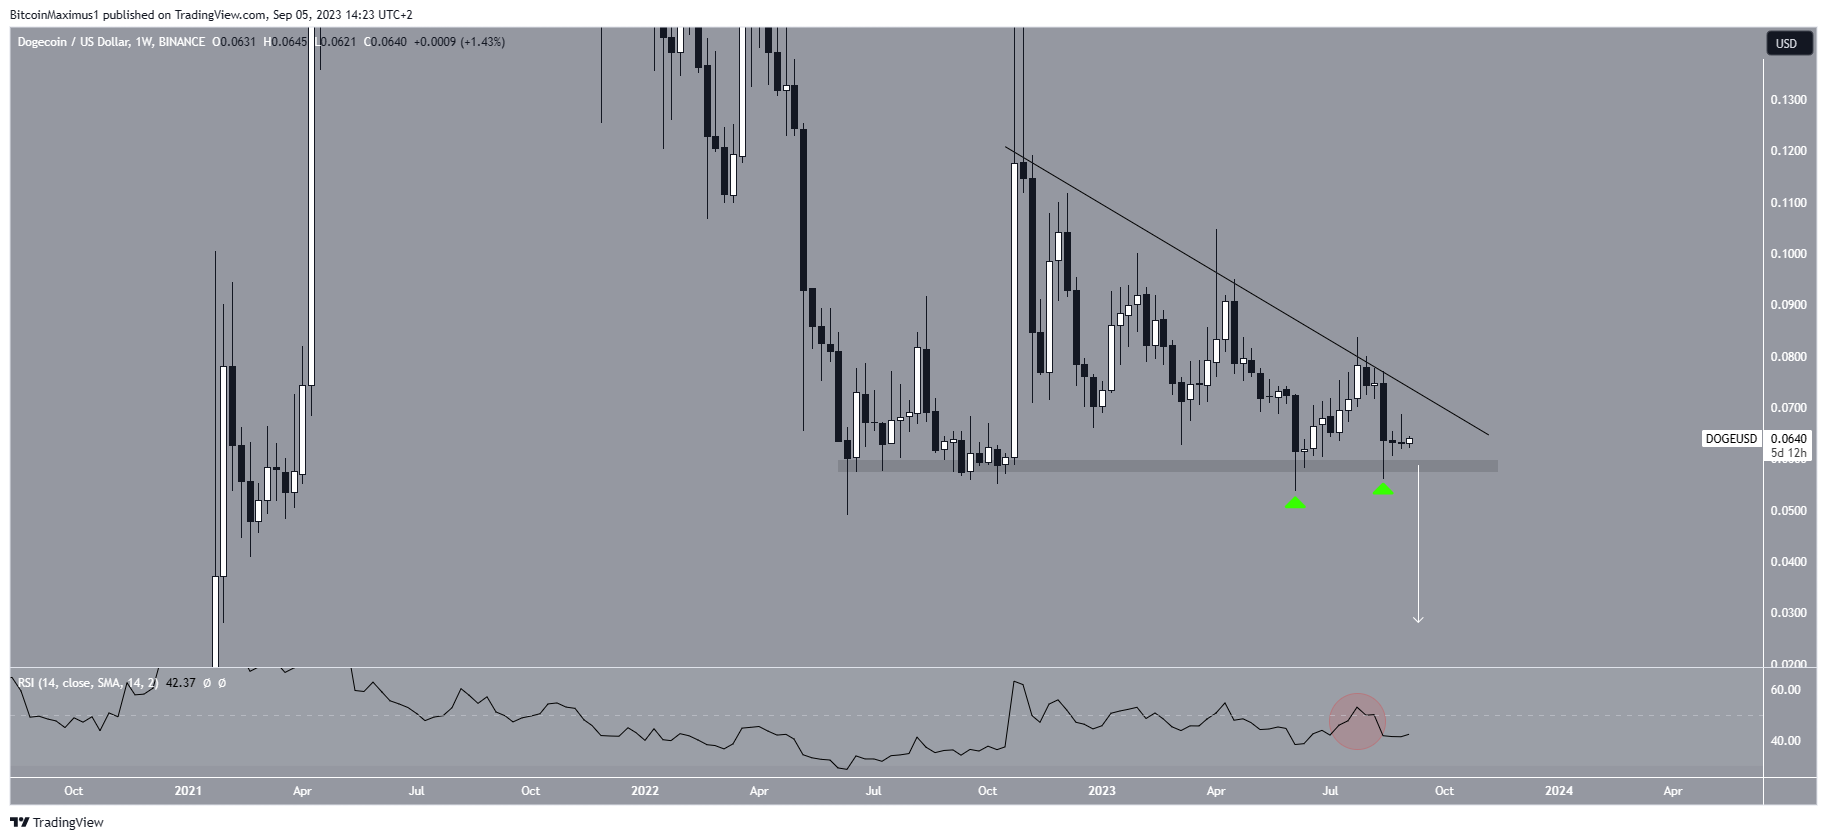 Dogecoin (DOGE) Price Weekly